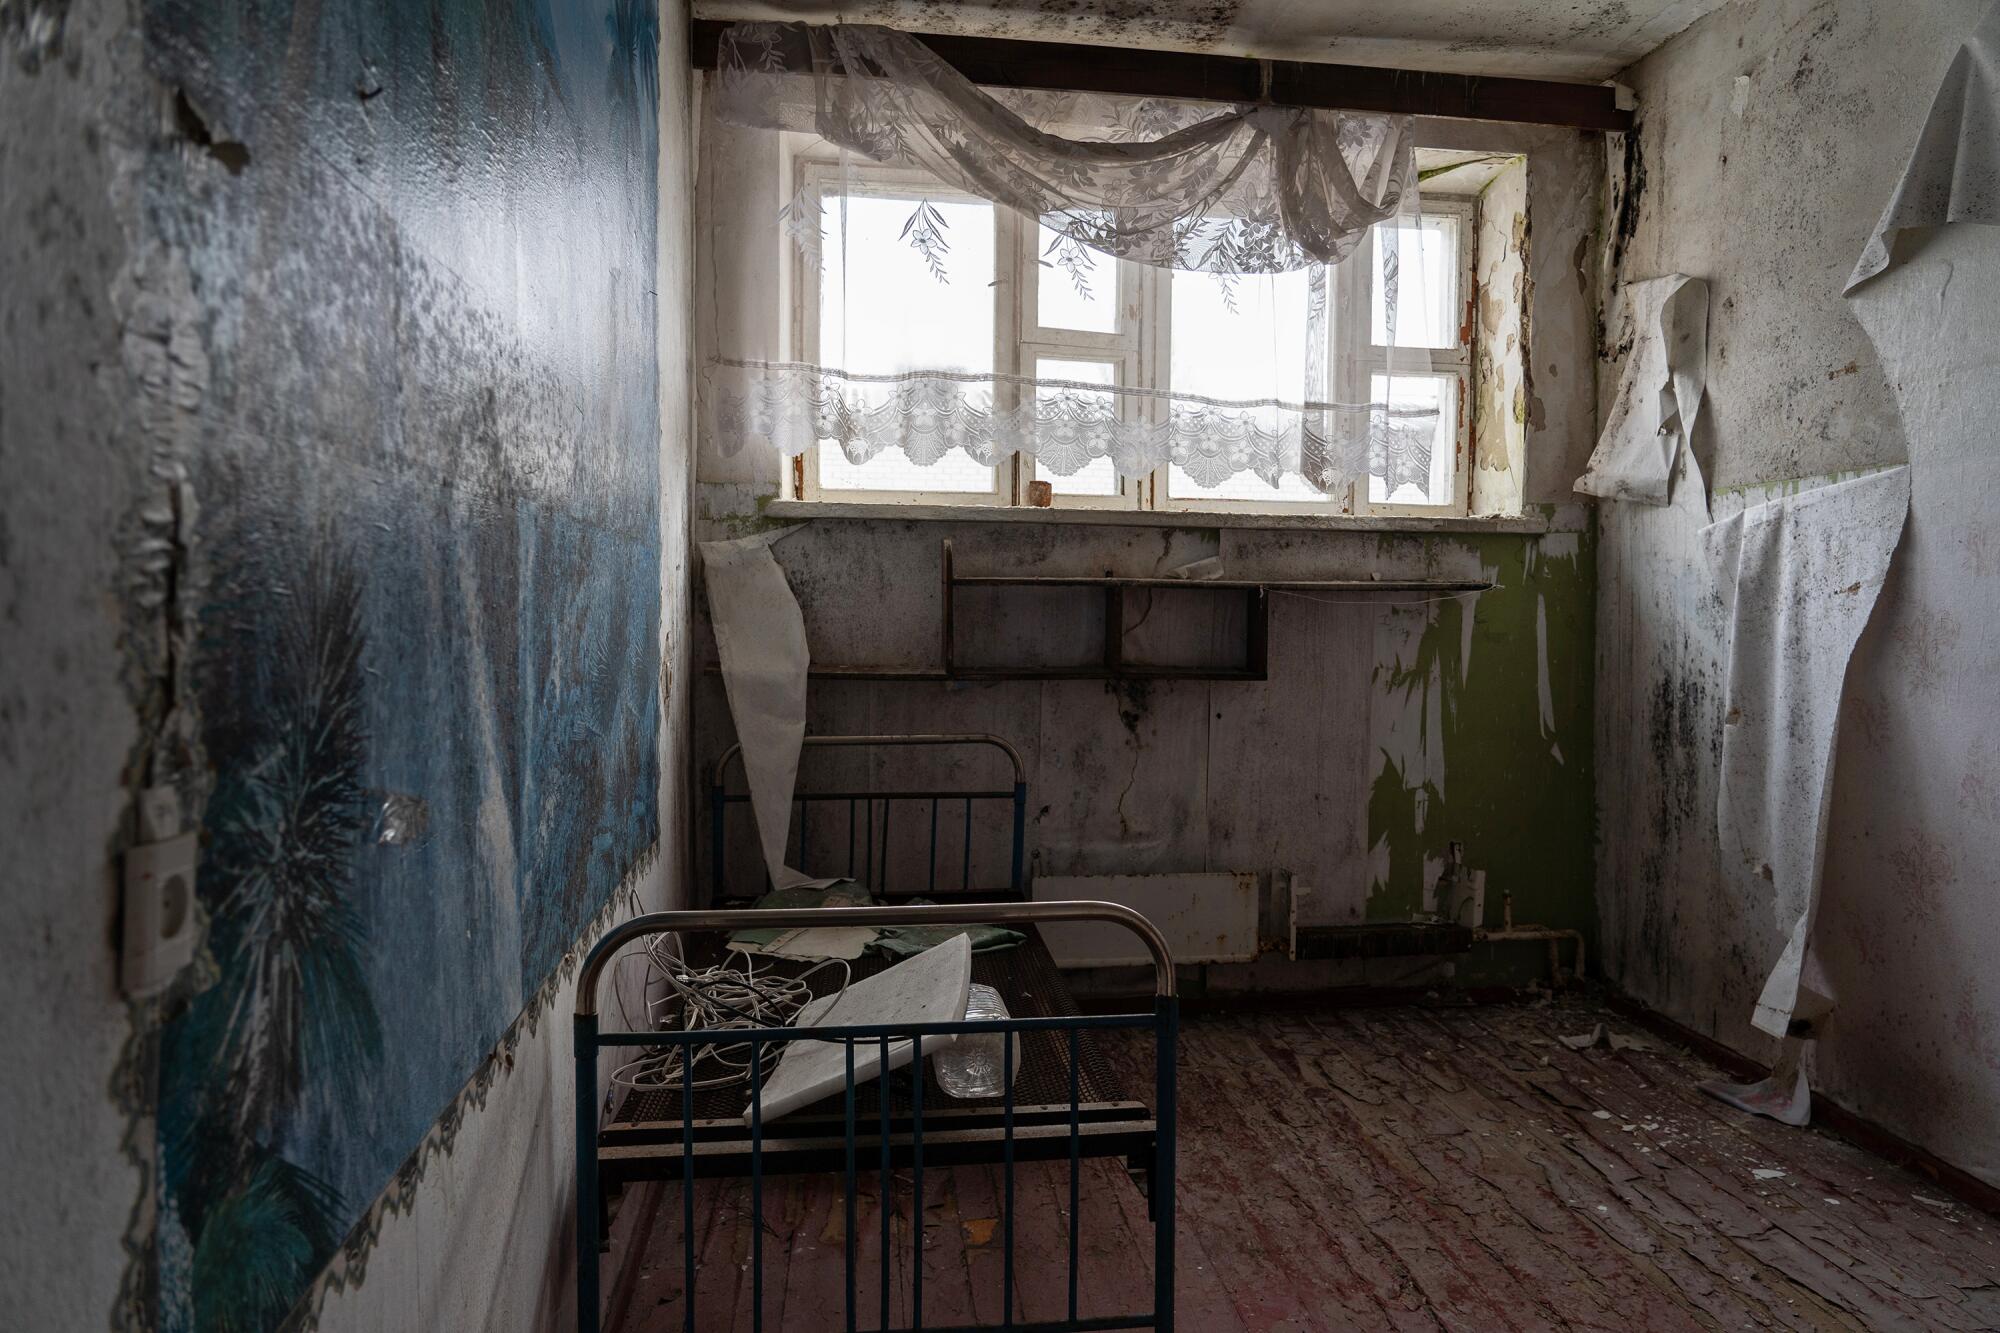 A room in the Bilyayivka school used by Russian soldiers as a prison.